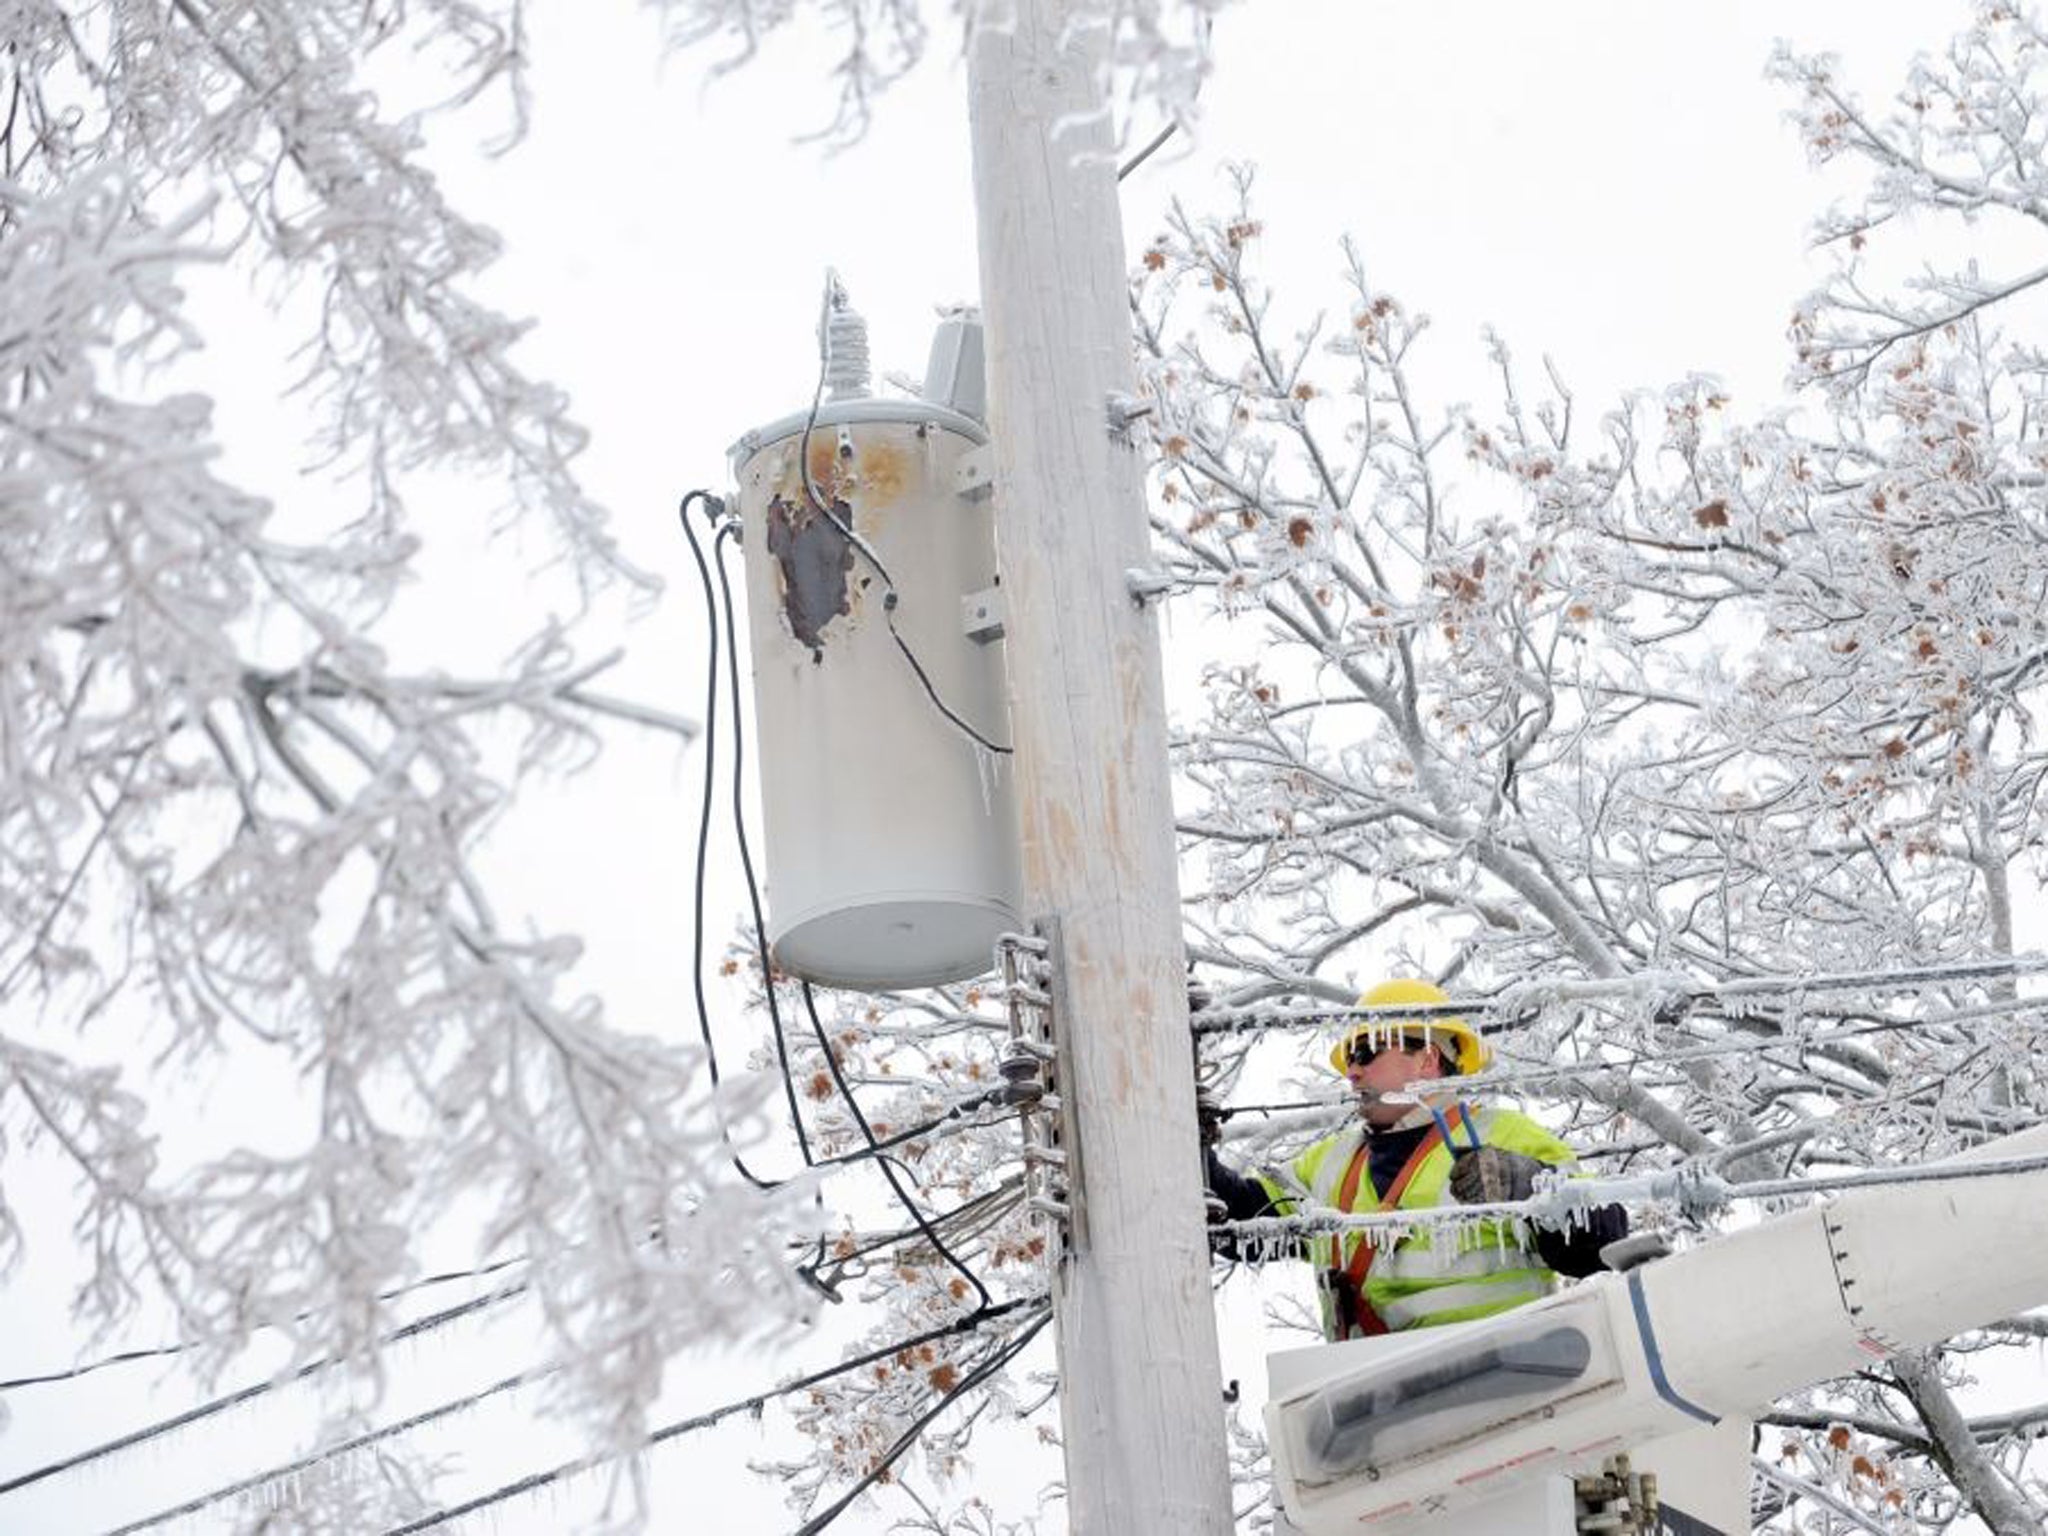 A lineman works on connecting fallen wires in Michigan